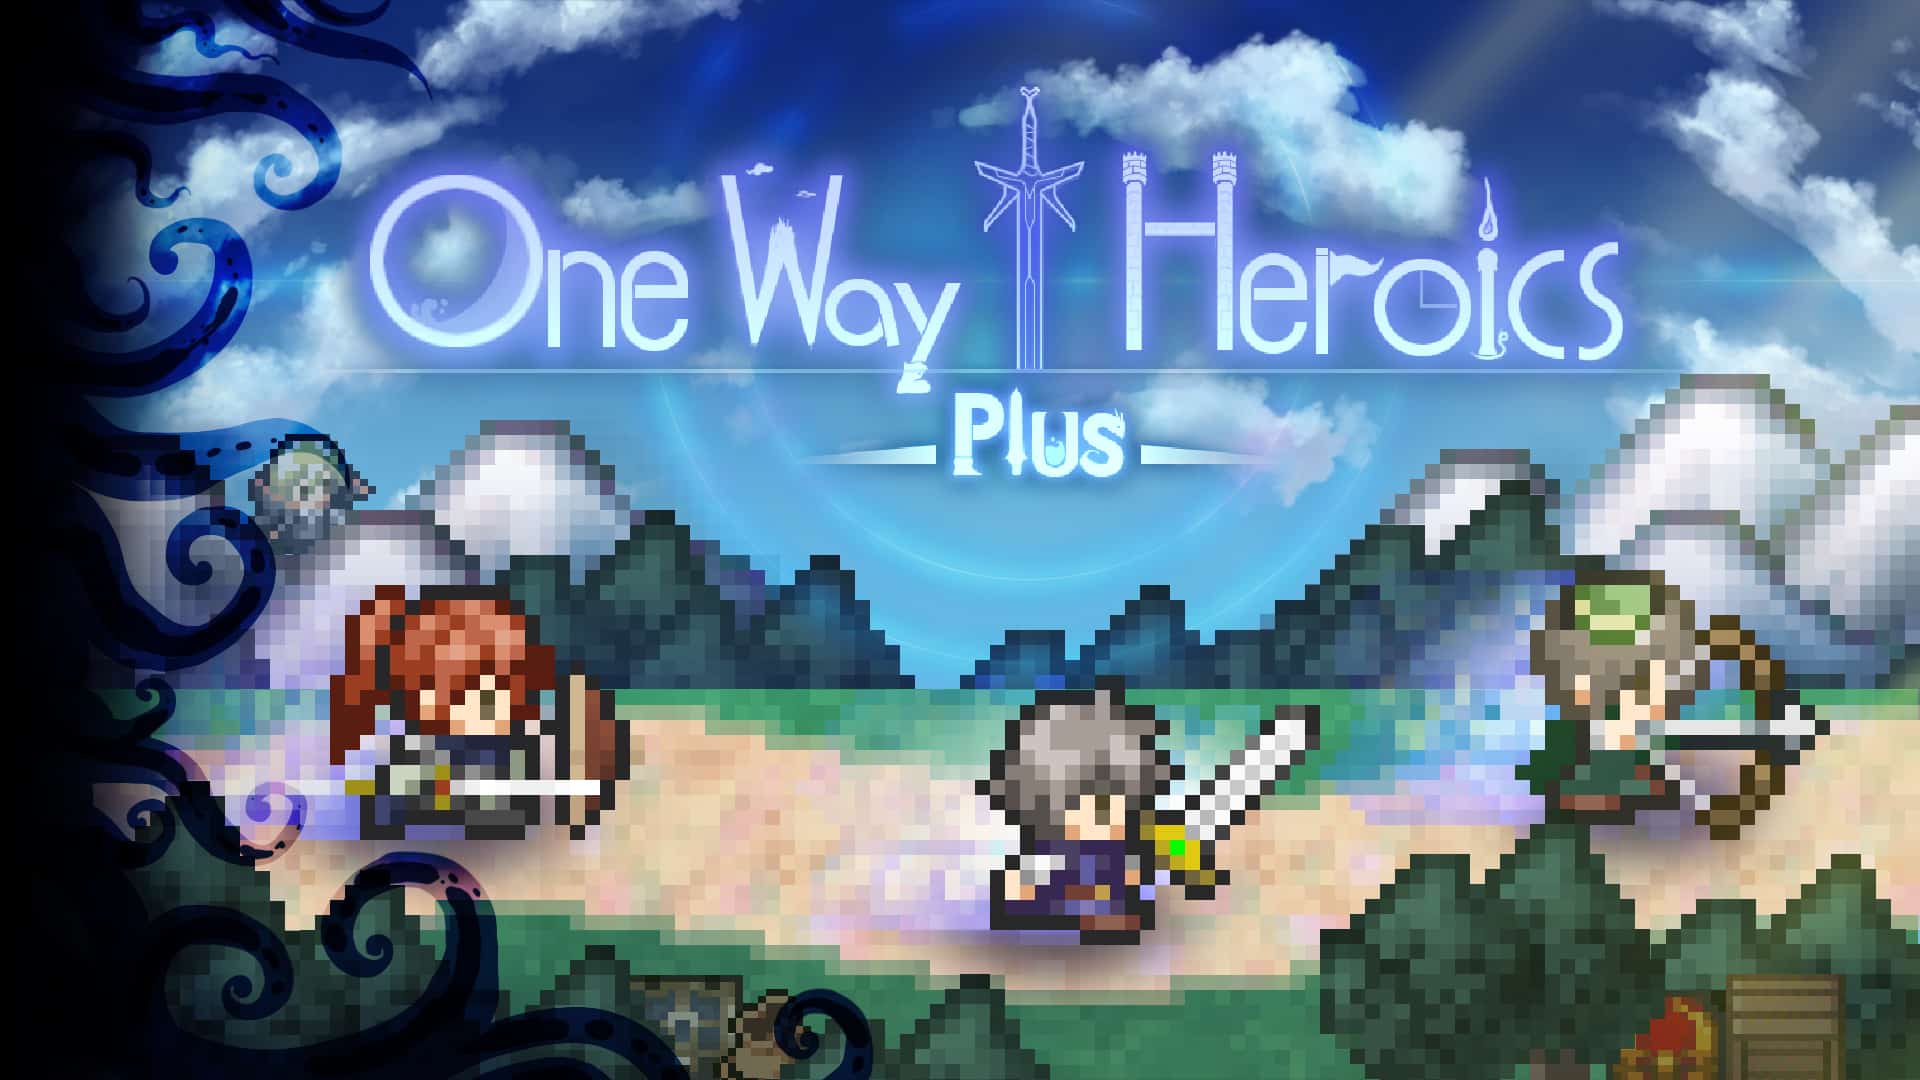 One Way Heroics Plus player count stats